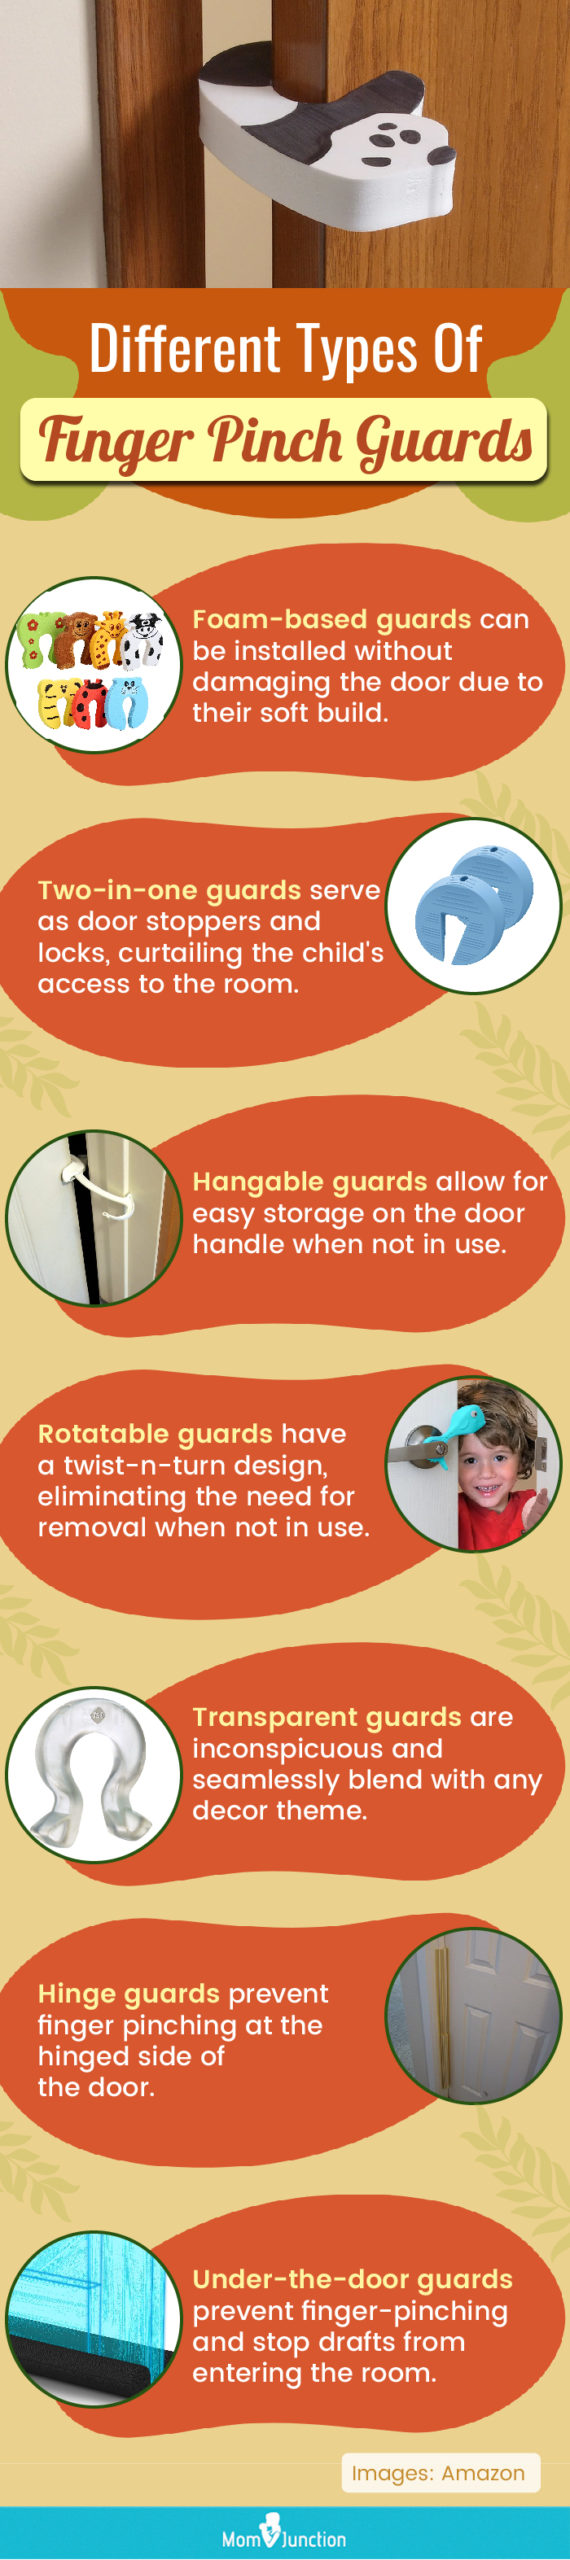 Different Types Of Finger Pinch Guards (infographic)